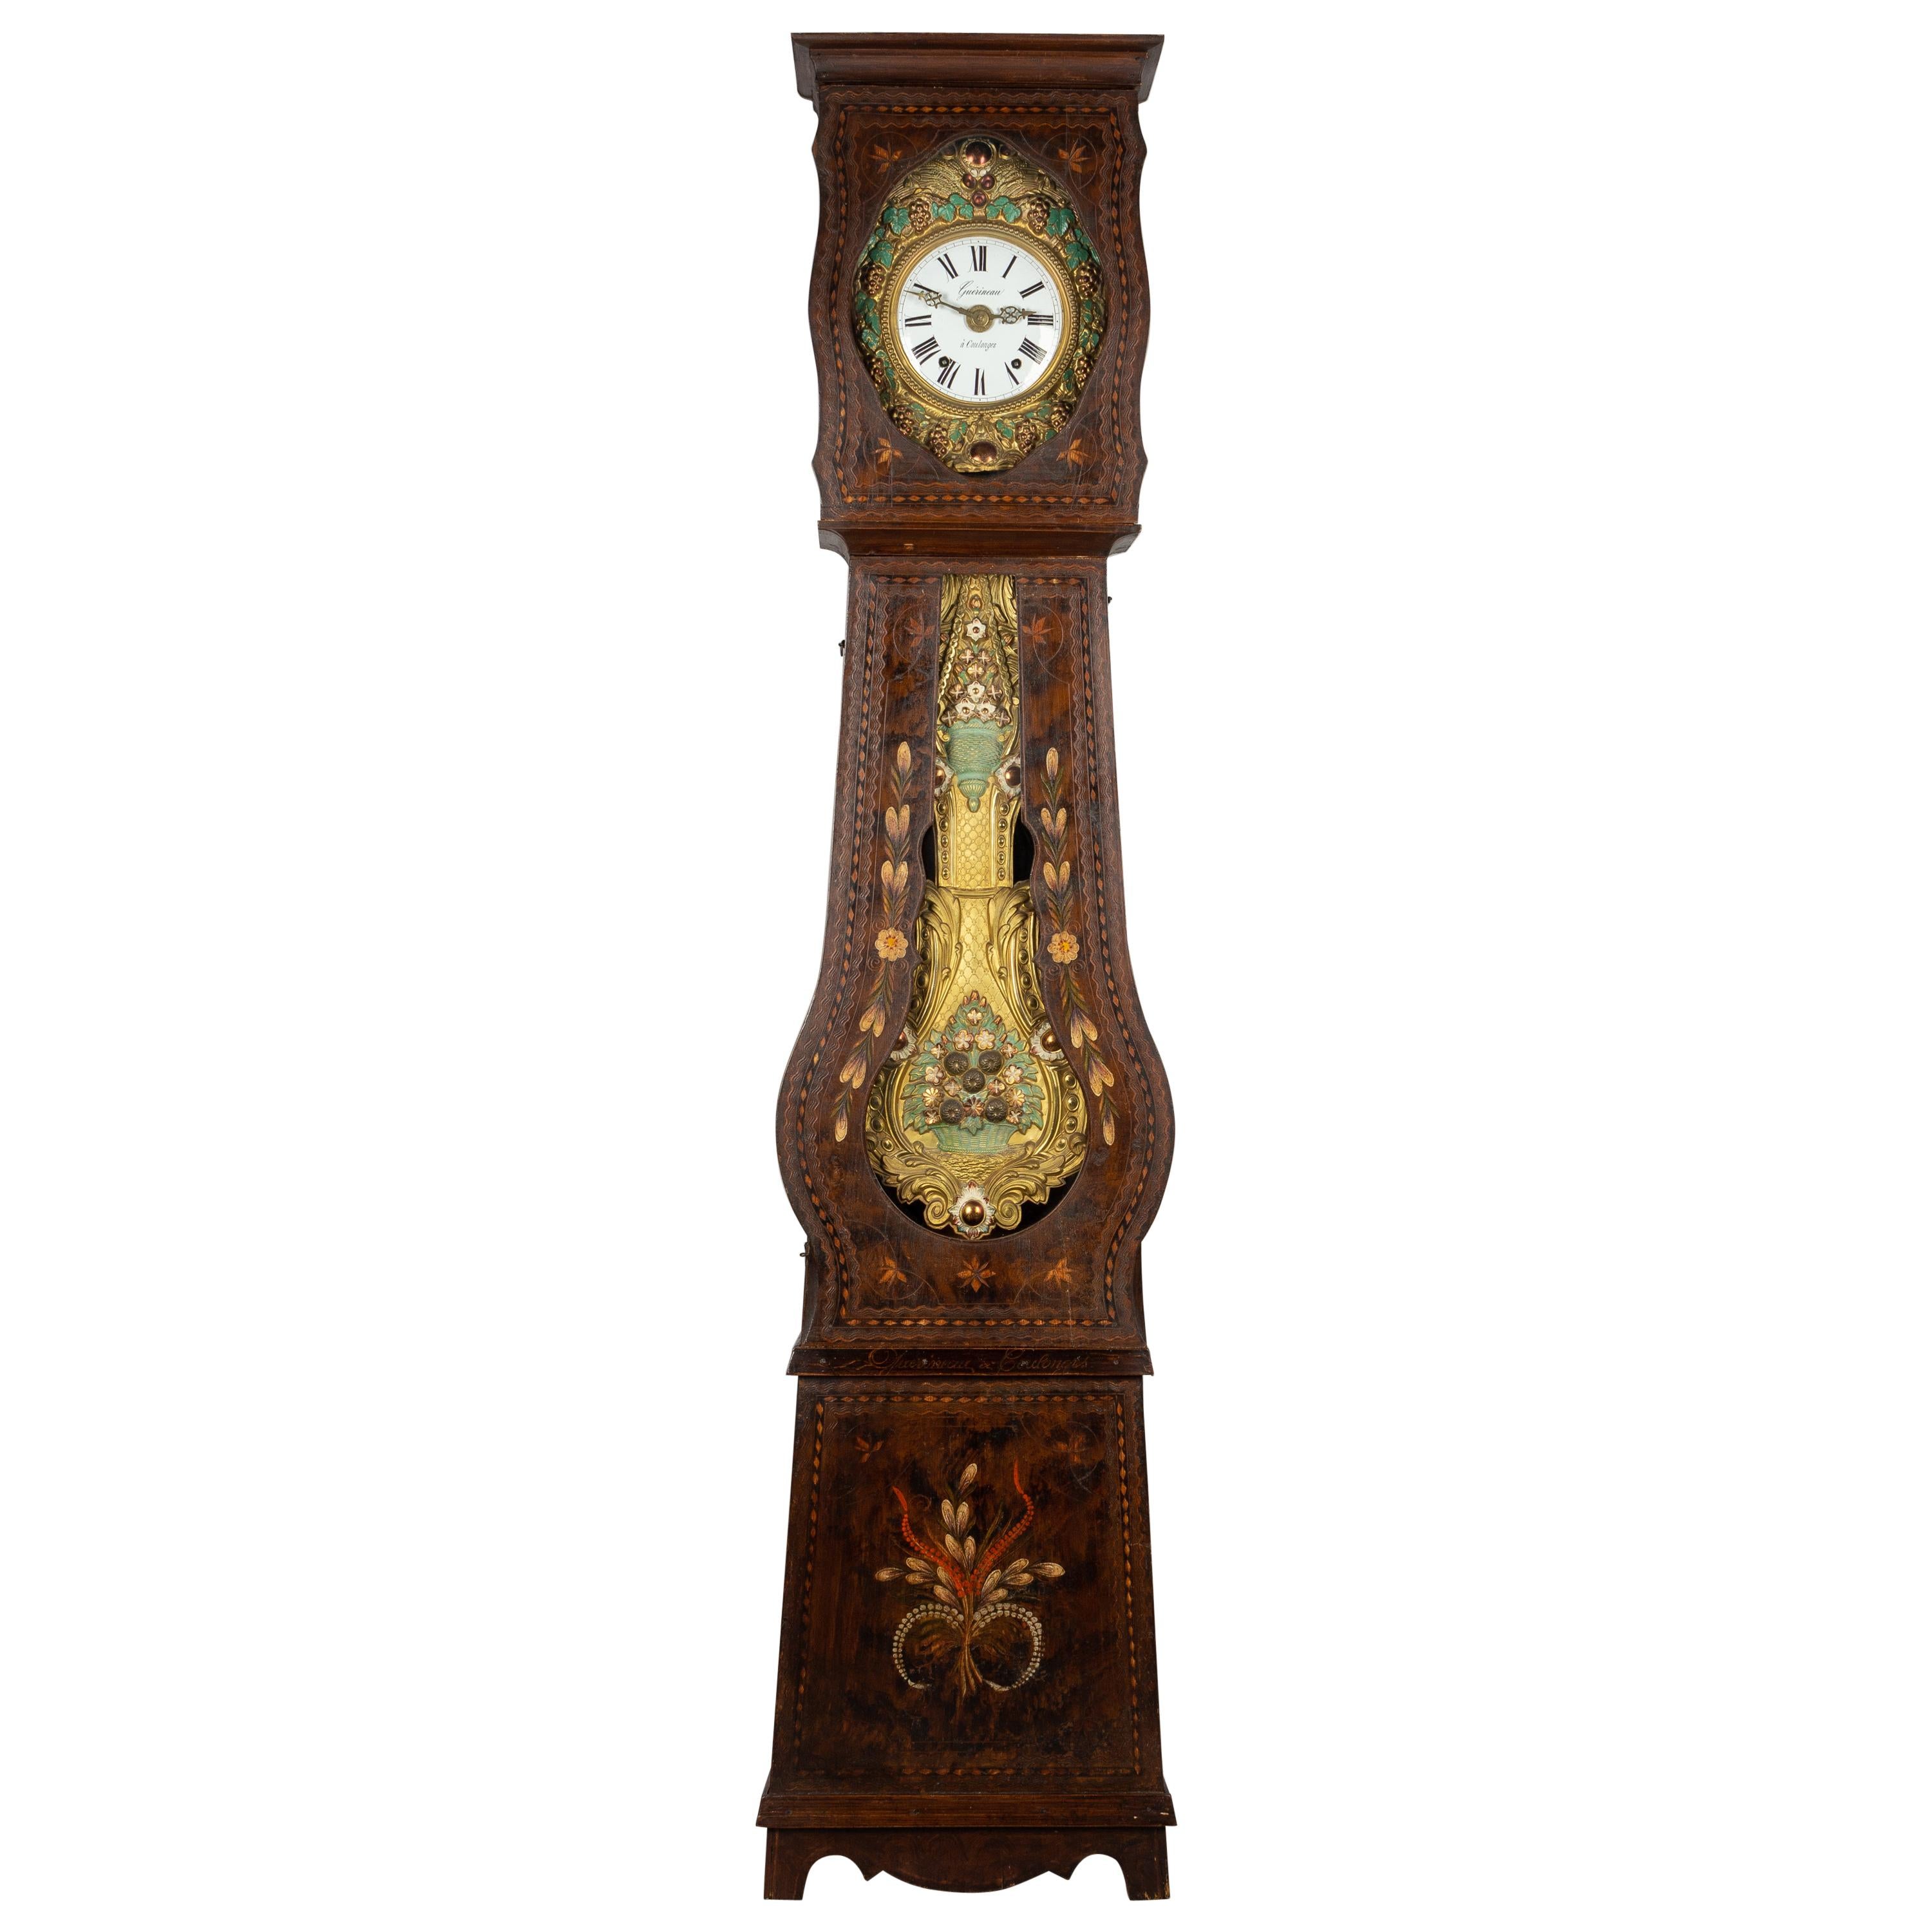 19th Century French Comtoise Grandfather Clock